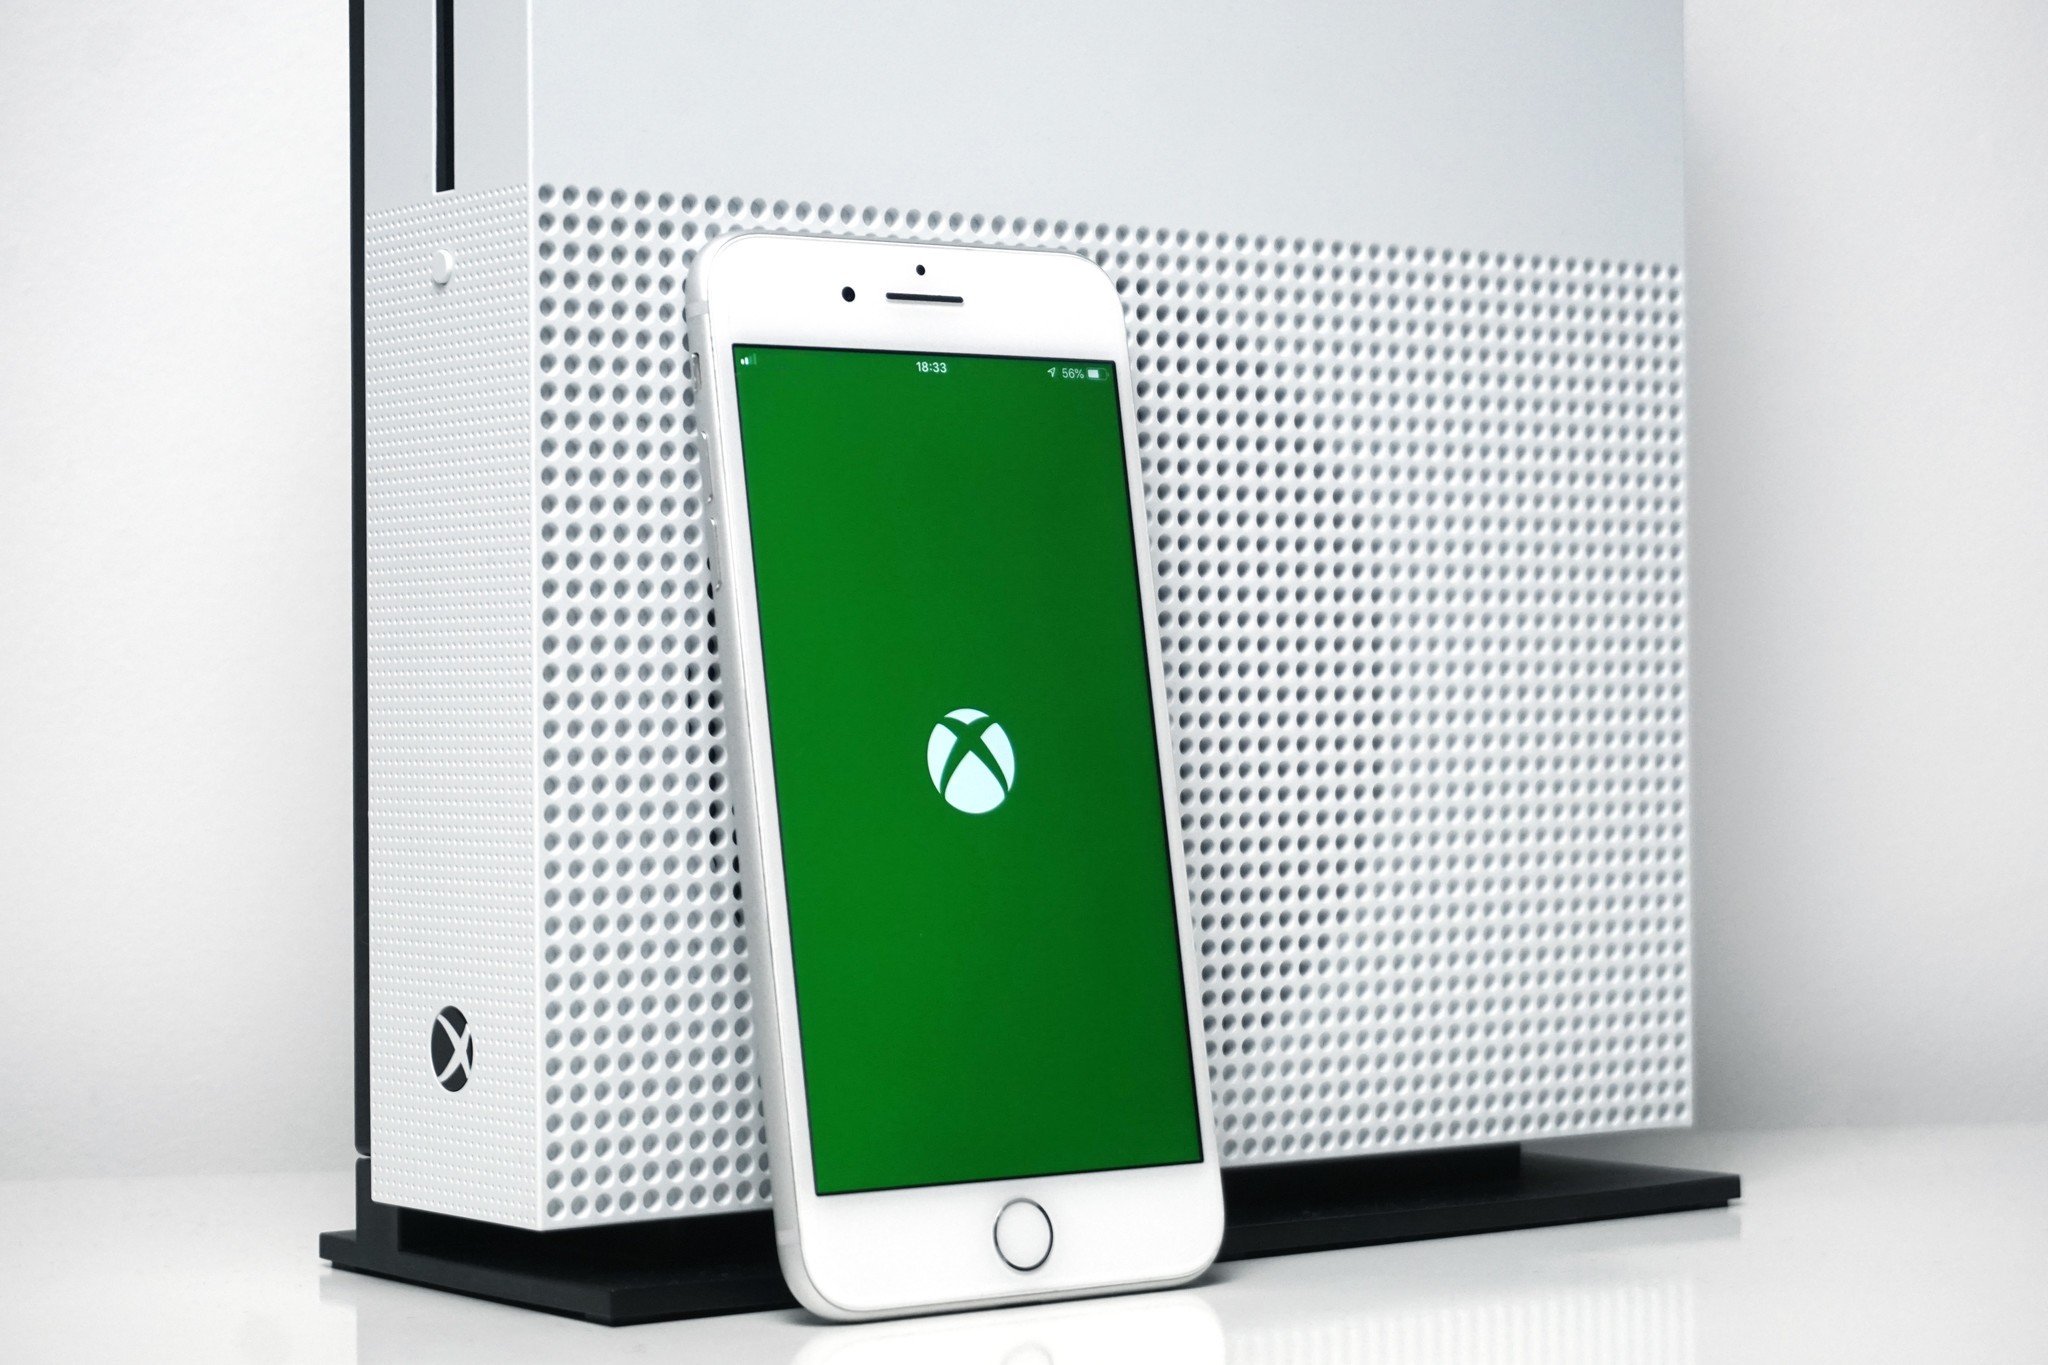 Microsoft’s Xbox Live can soon work in any Android game